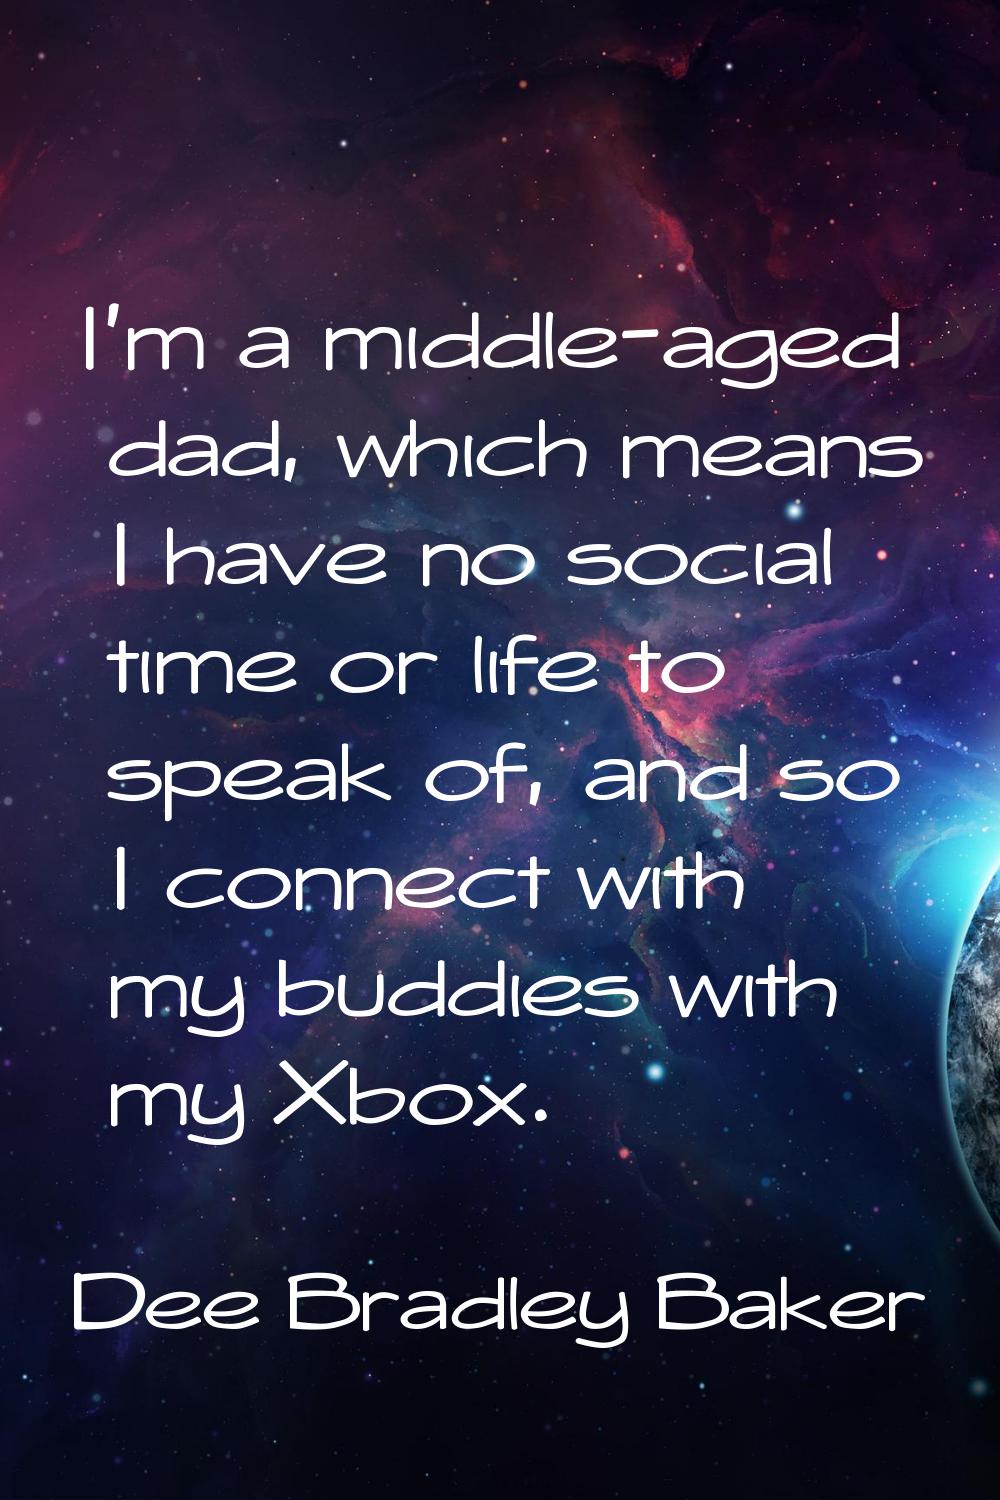 I'm a middle-aged dad, which means I have no social time or life to speak of, and so I connect with